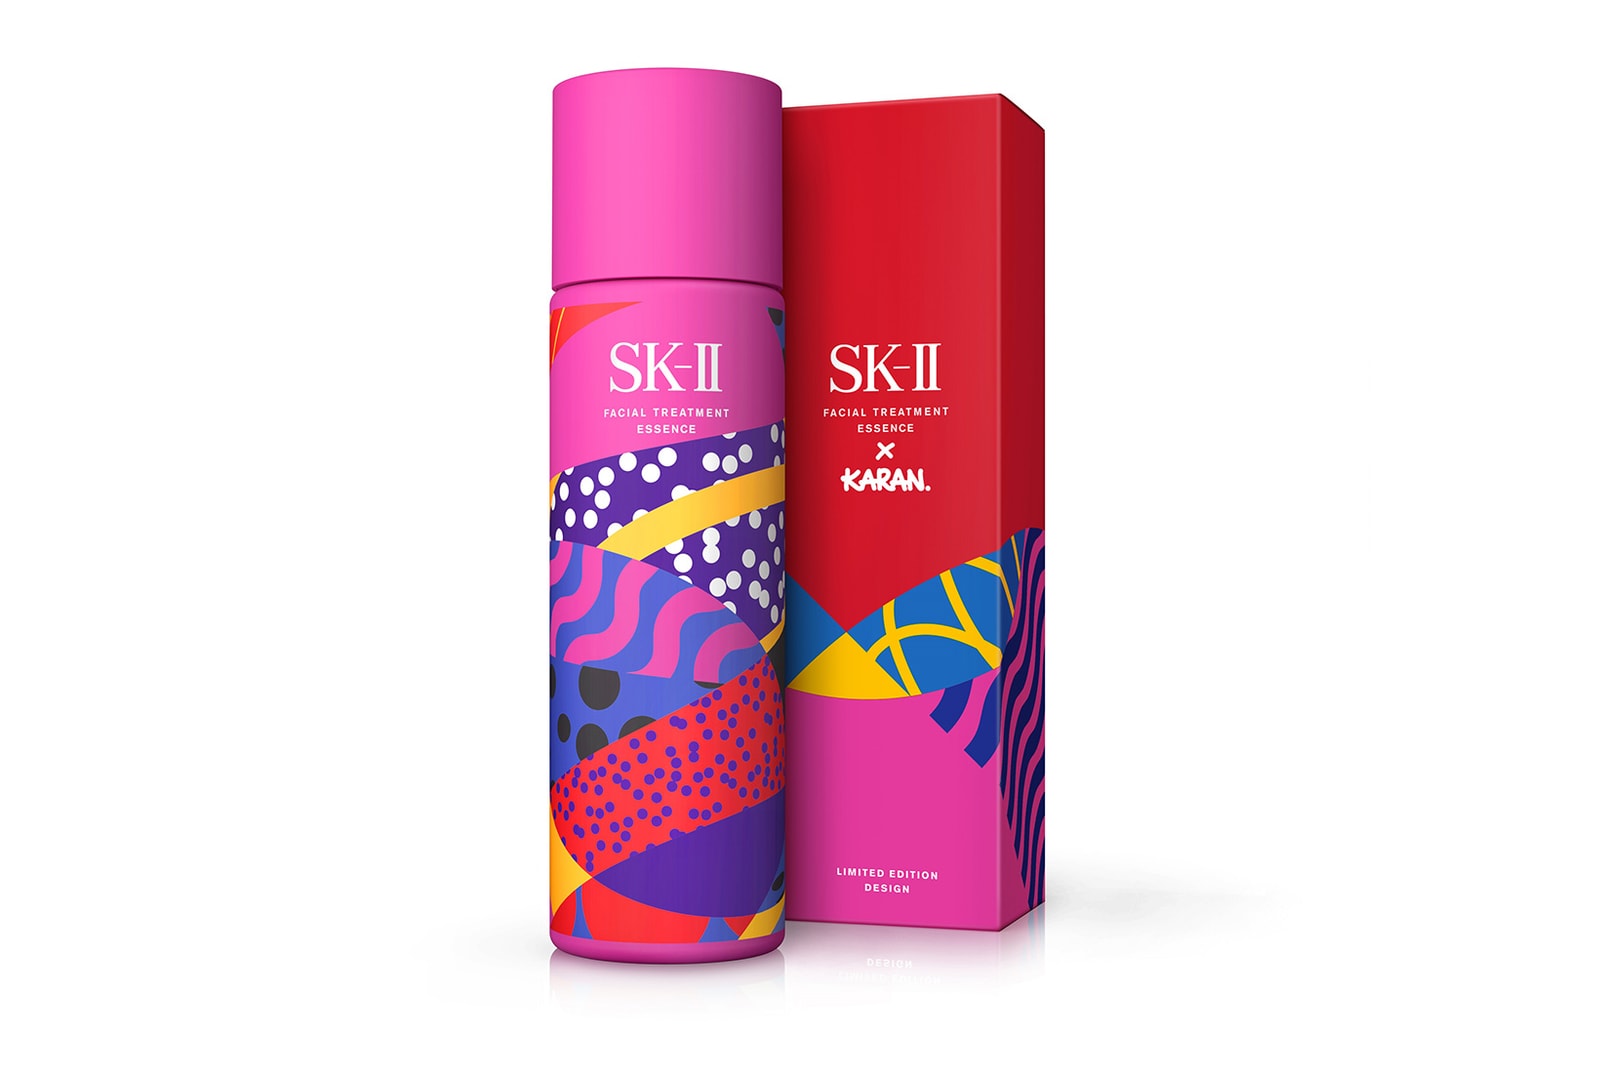 SK-II Facial Treatment Essence Review skincare beauty miracle water